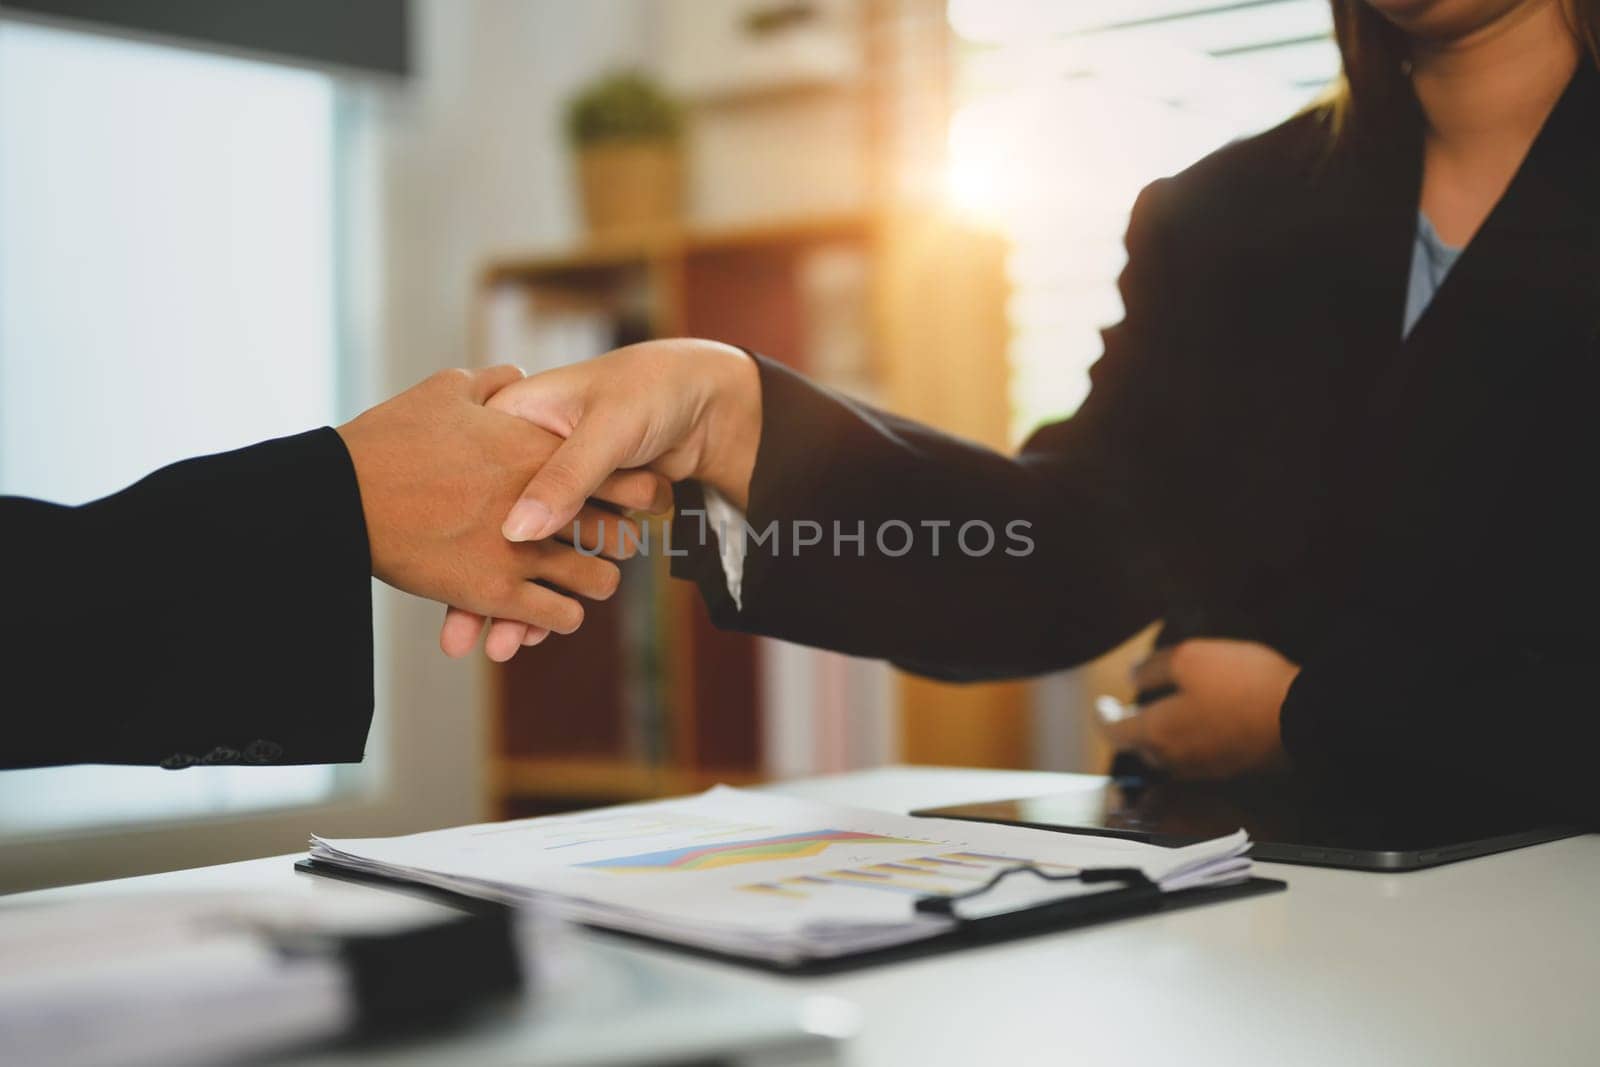 Cropped image of businesspeople shaking hands on business cooperation agreement by prathanchorruangsak